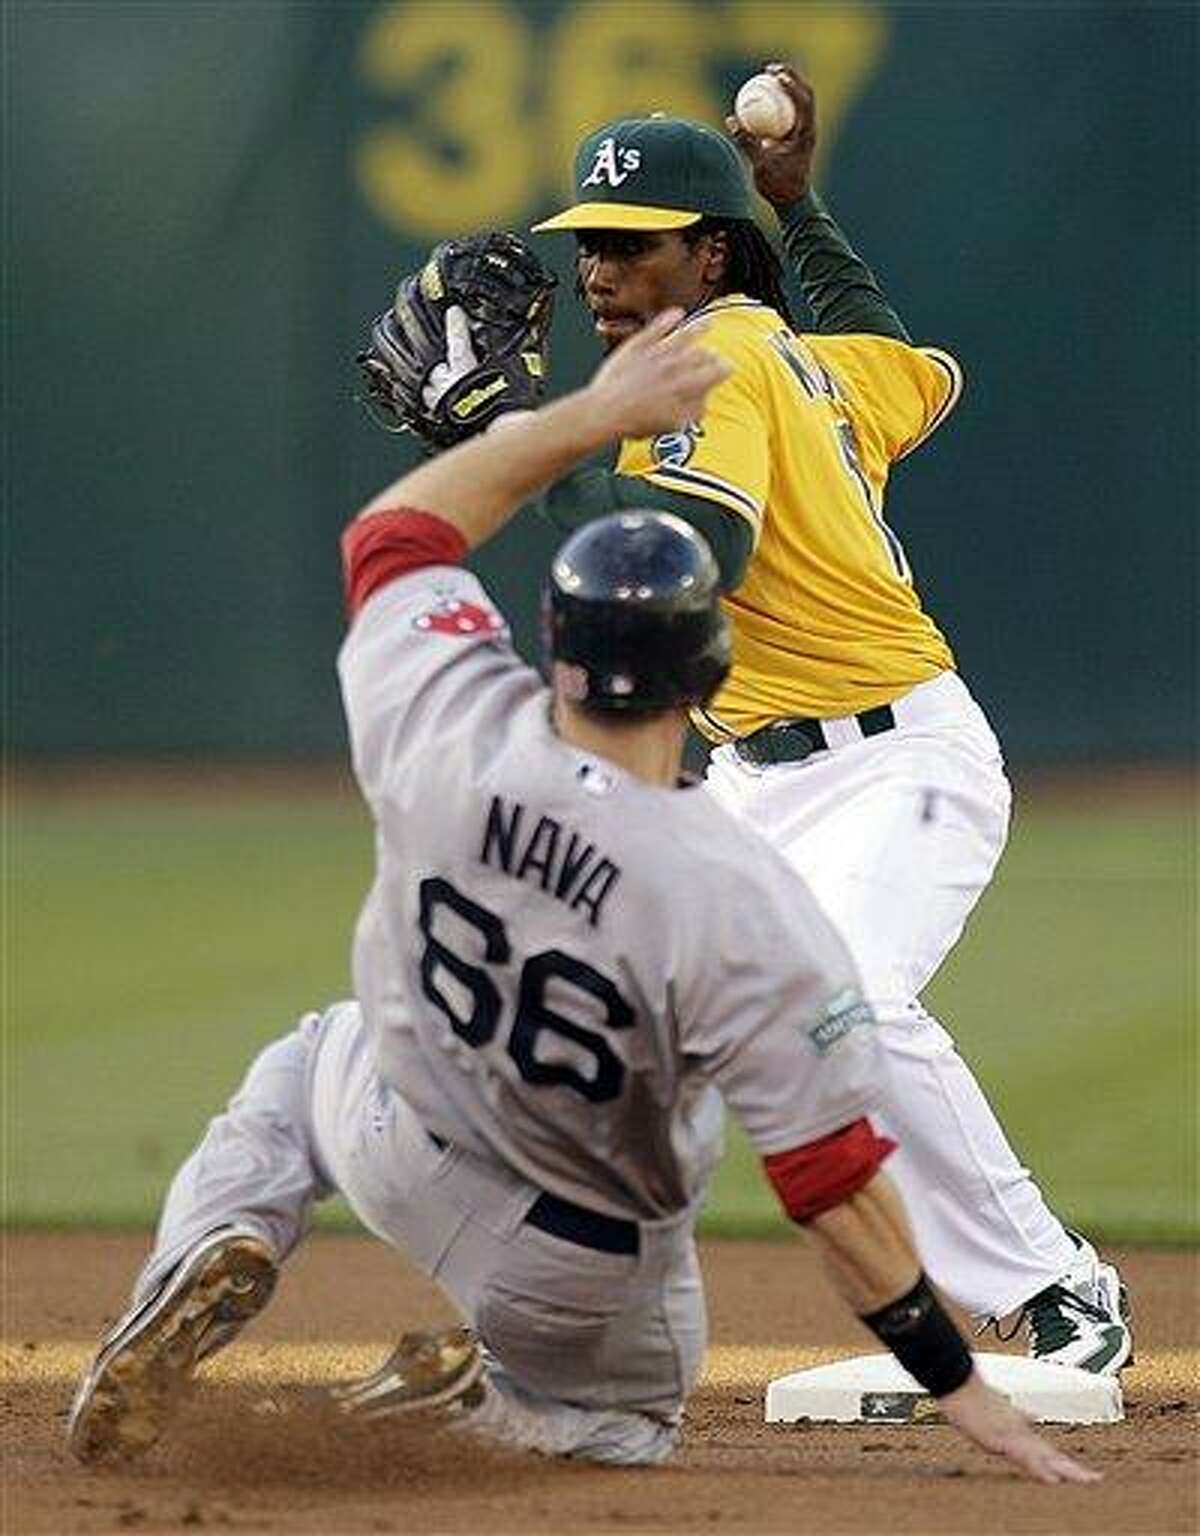 Oakland Athletics second baseman Jemile Weeks prepares his throw to first base over Boston Red Sox's Daniel Nava (66) in the first inning of a baseball game, Tuesday, July 3, 2012, in Oakland, Calif. Boston's Dustin Pedroia was out at first base. (AP Photo/Ben Margot)